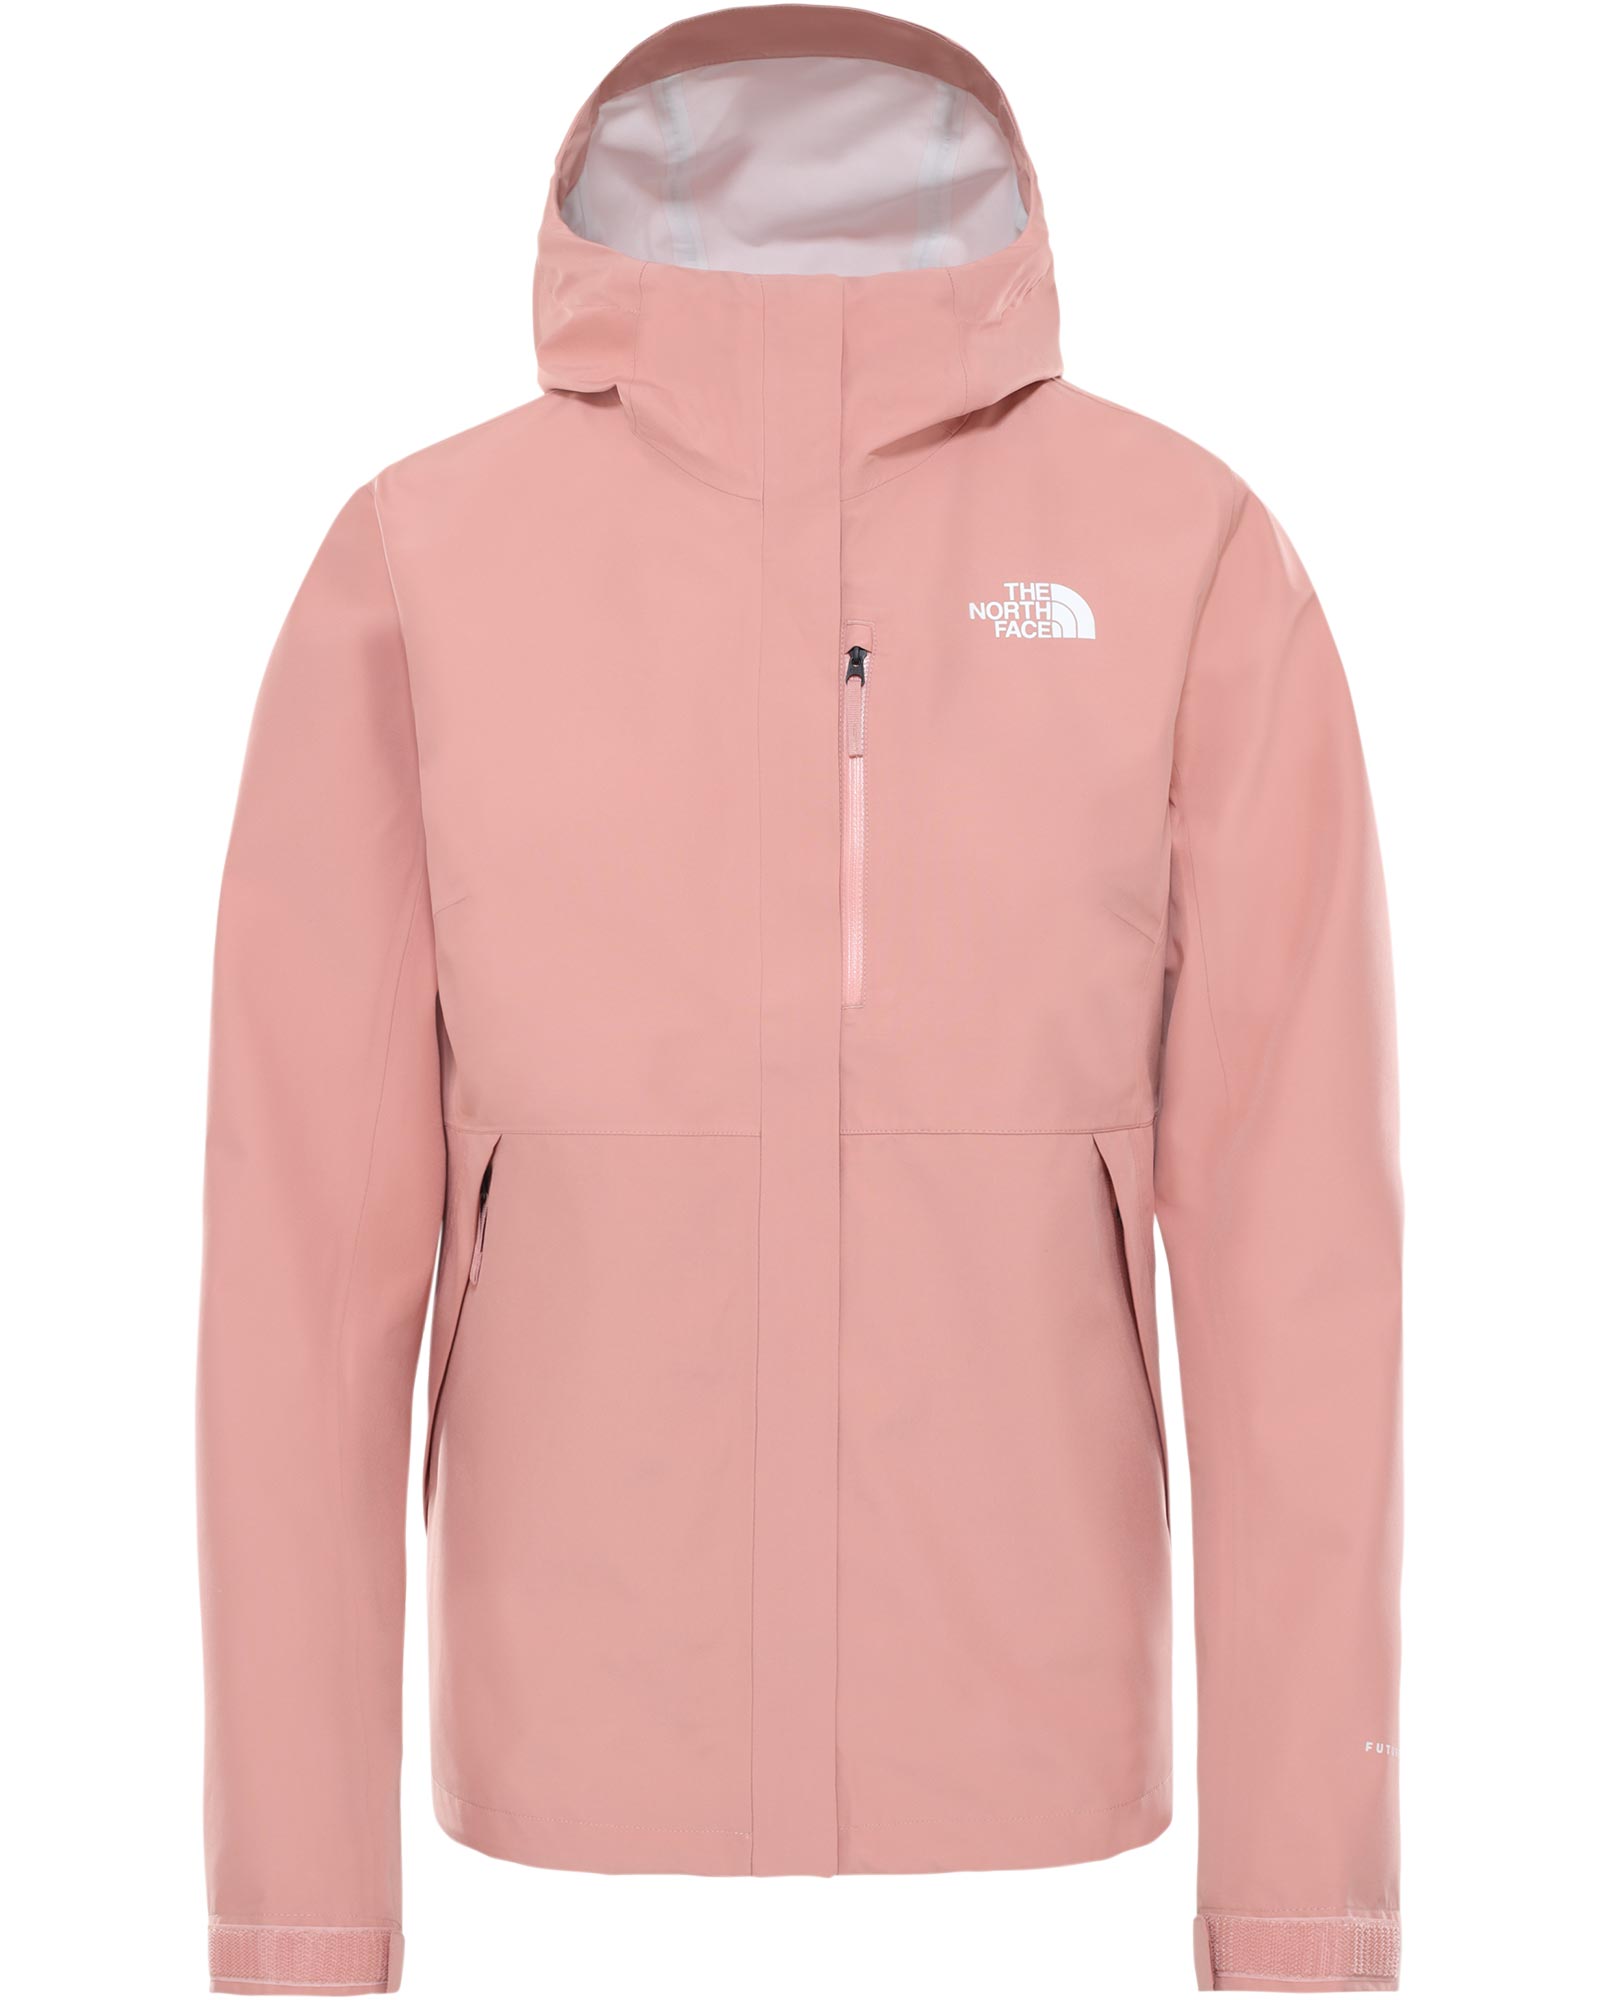 The North Face Dryzzle FUTURELIGHT Women’s Jacket - Pink Clay XS